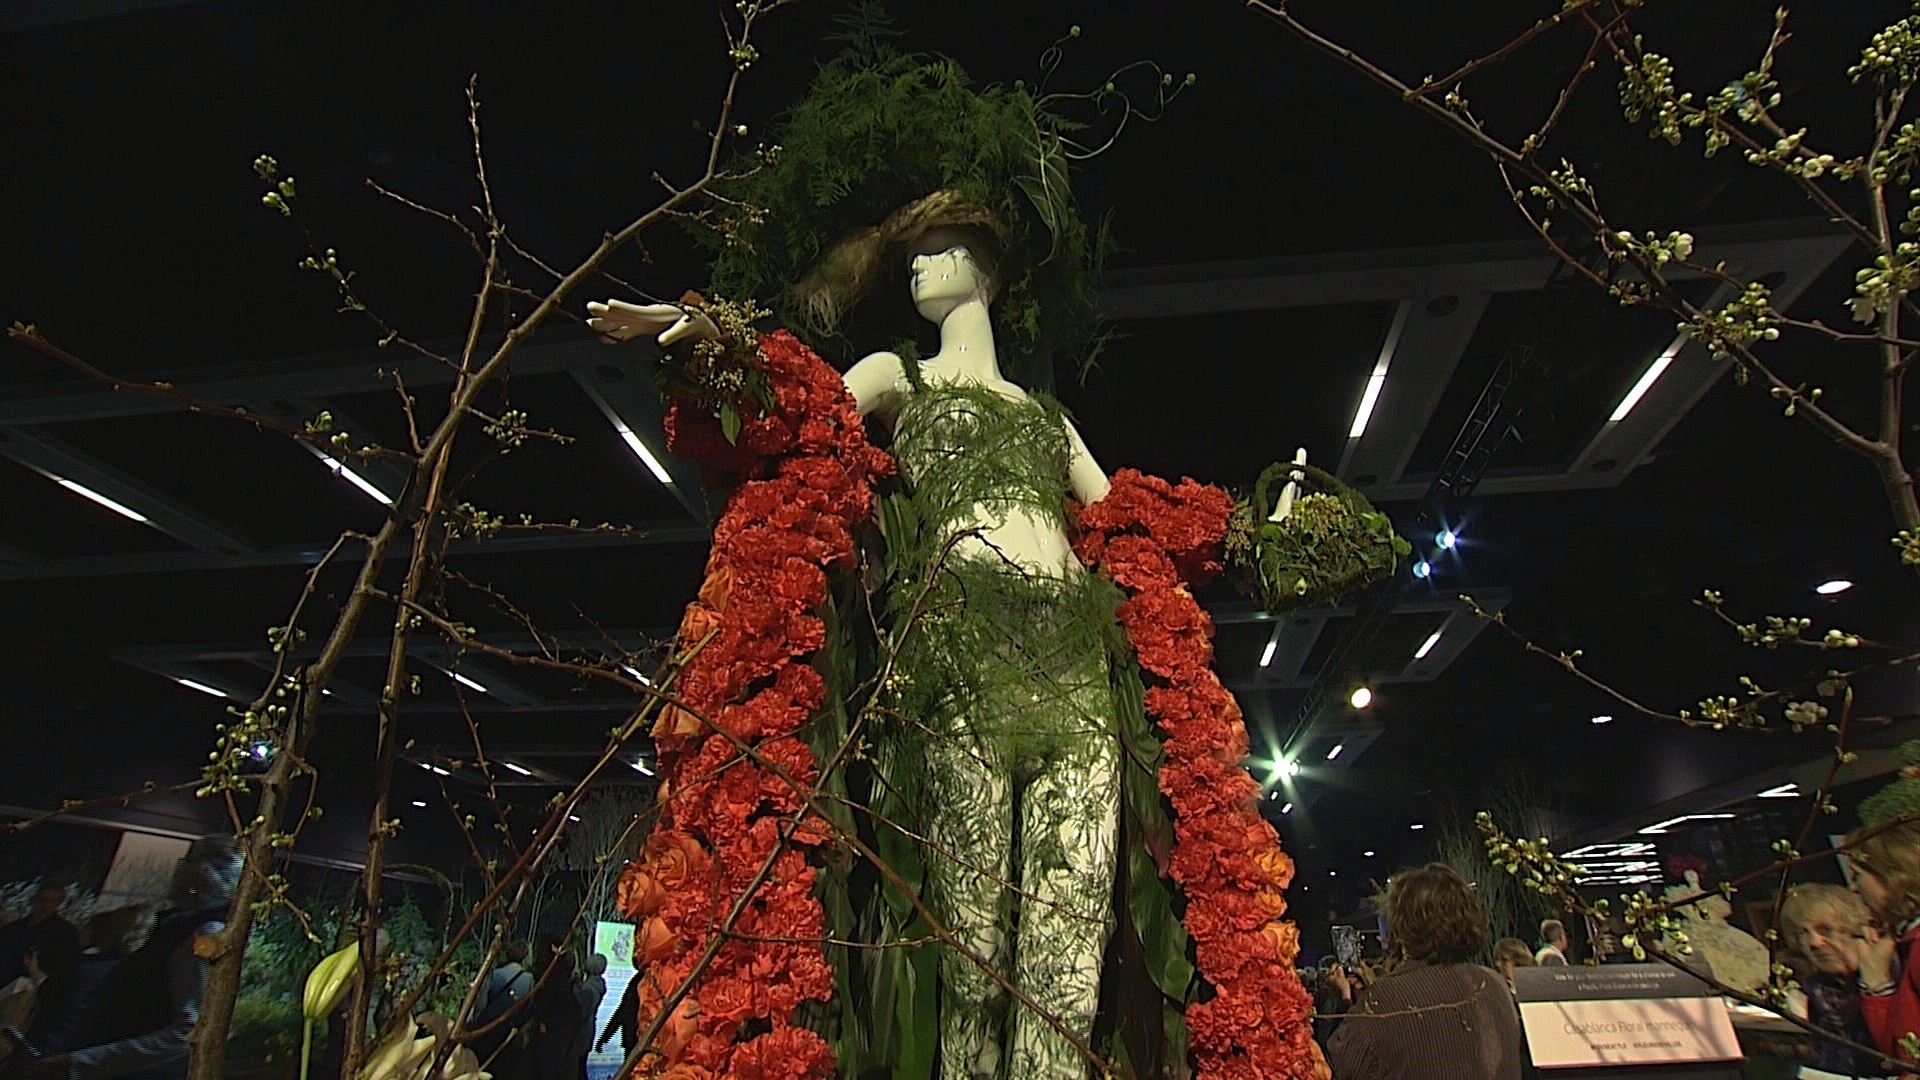 The floral creations are a new addition to the annual event drawing tens of thousands of visitors each year. Sponsored by Northwest Flower and Garden Festival.